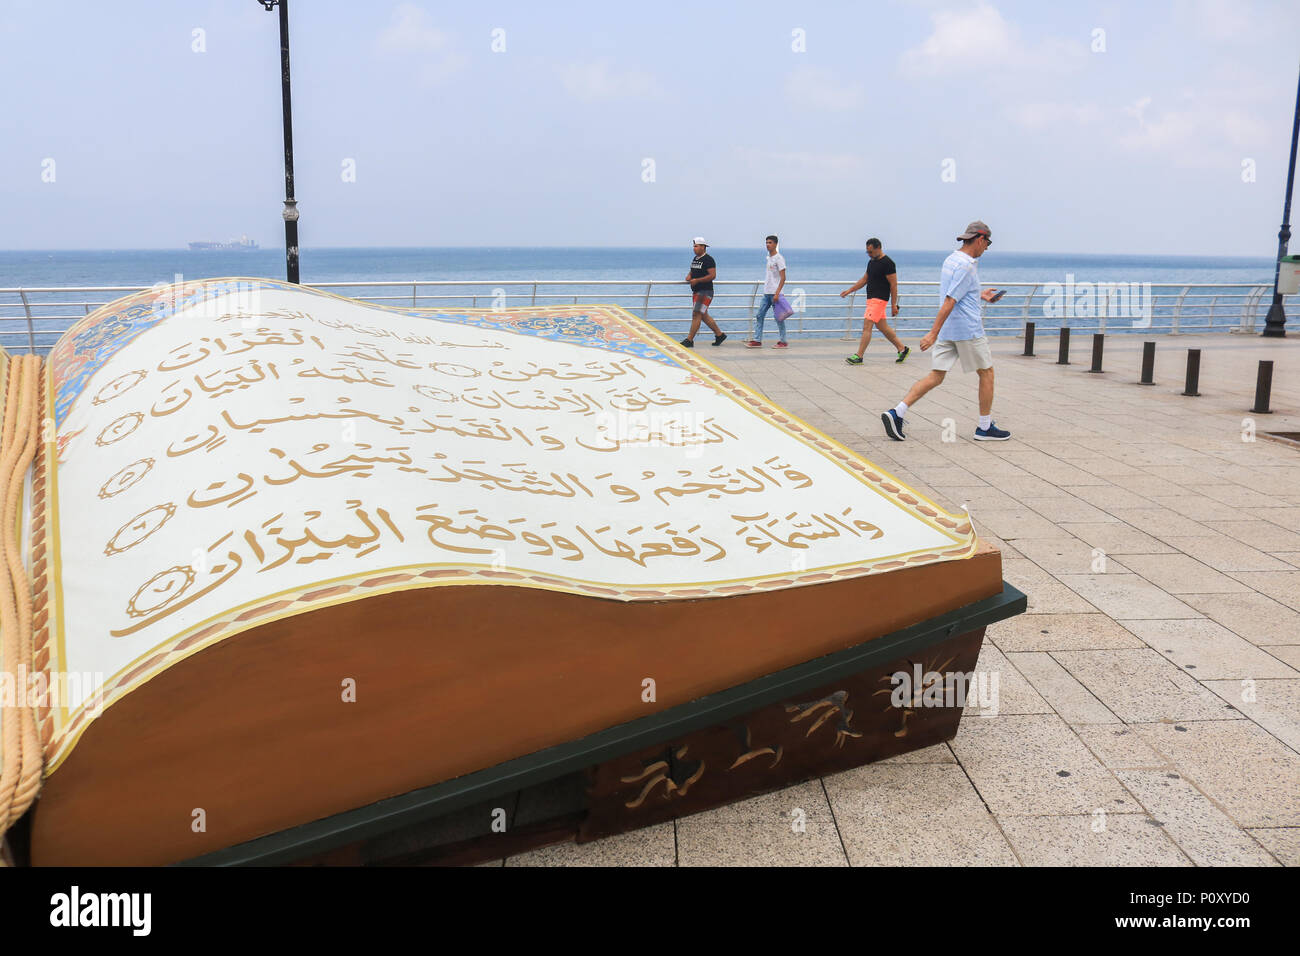 Beirut Lebanon. 10th June. A large opened Quran book is displayed on the Beirut  seafront promenade  to celebrate the Islamic holy month of Ramadan which ends on 15th June. Ramdan traditionally falls on the ninth month of the Islamic calendar, and is observed by Muslims worldwide as a month of fasting (Sawm) to commemorate the first revelation of the Quran to the prophet Muhammad Credit: amer ghazzal/Alamy Live News Stock Photo